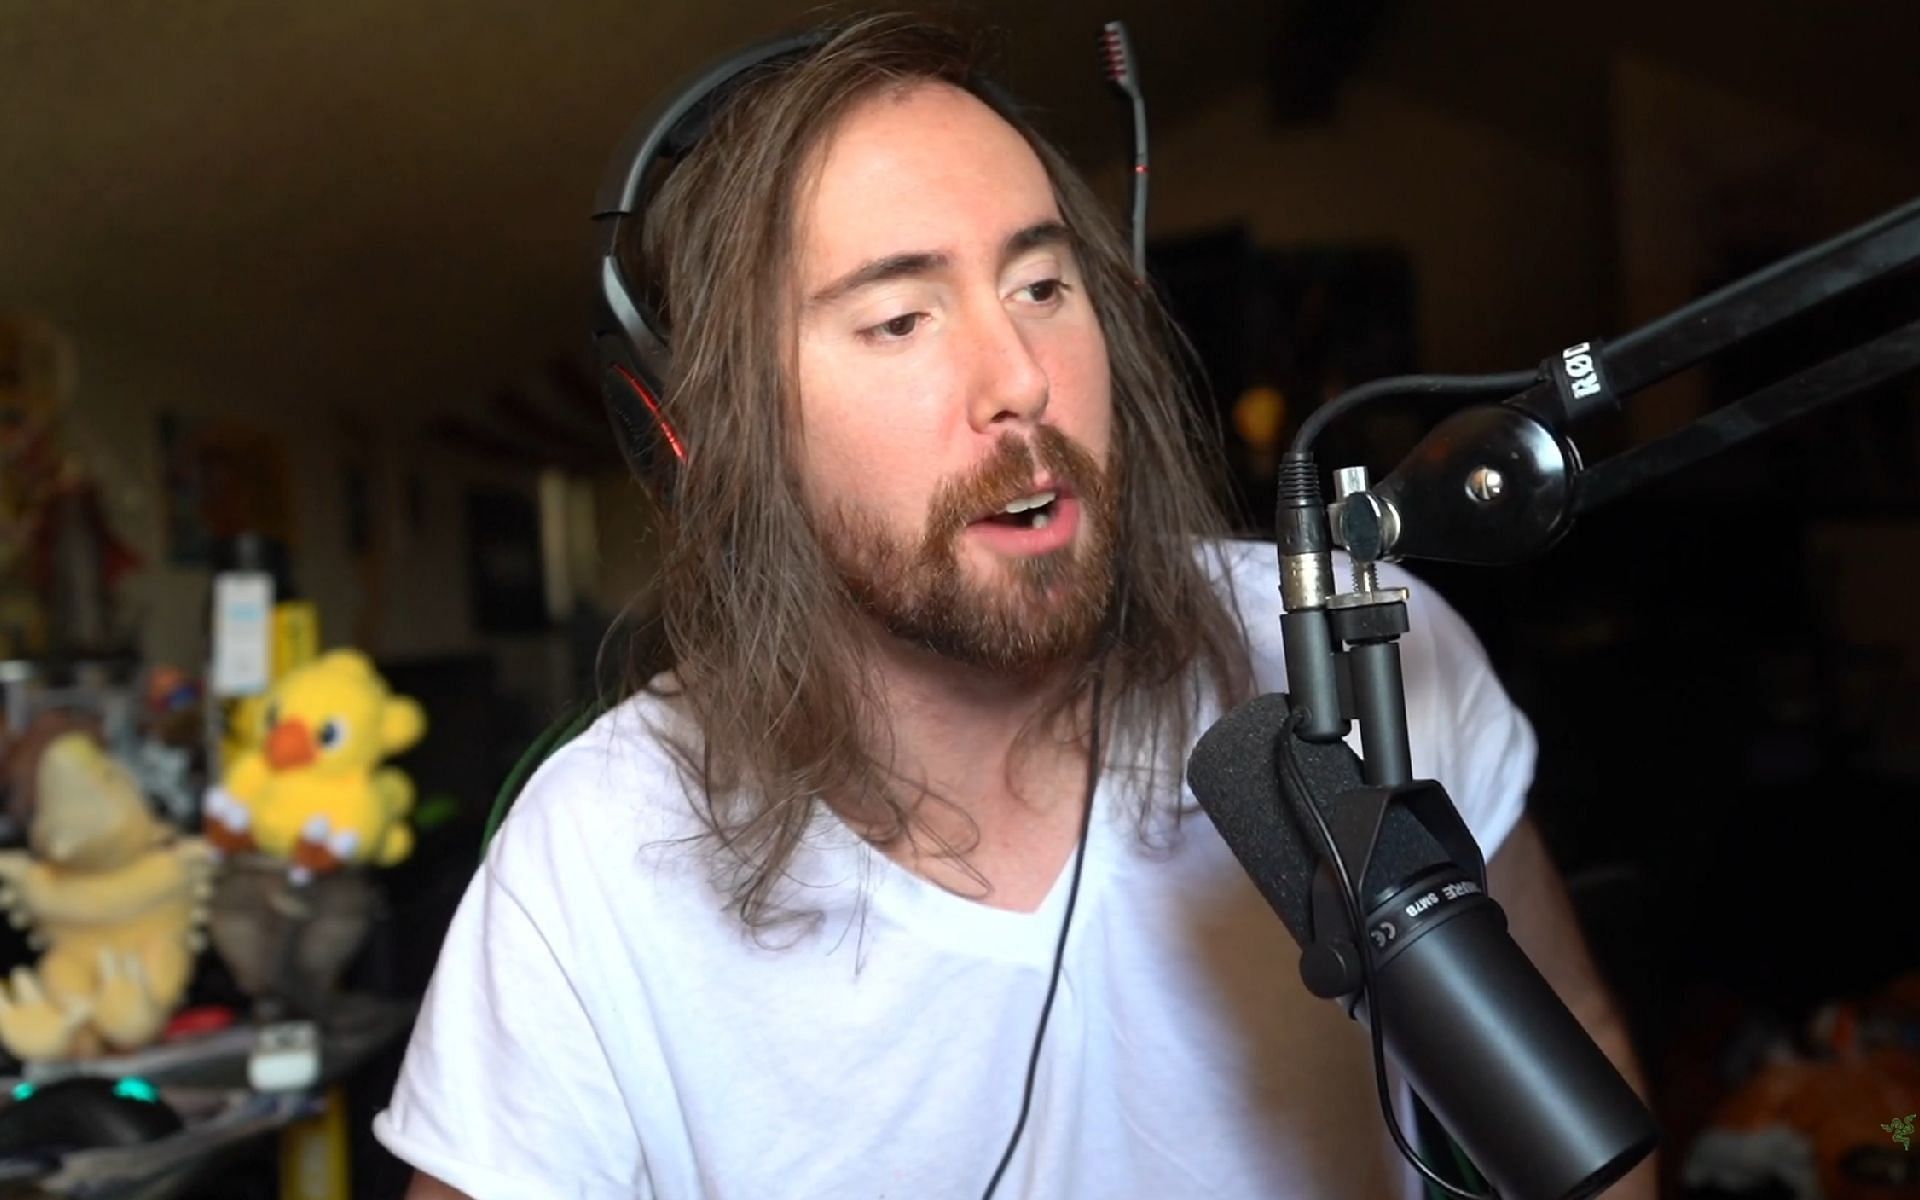 Asmongold provides an update on his personal life on Twitter (Image via Asmongold/Twitch)